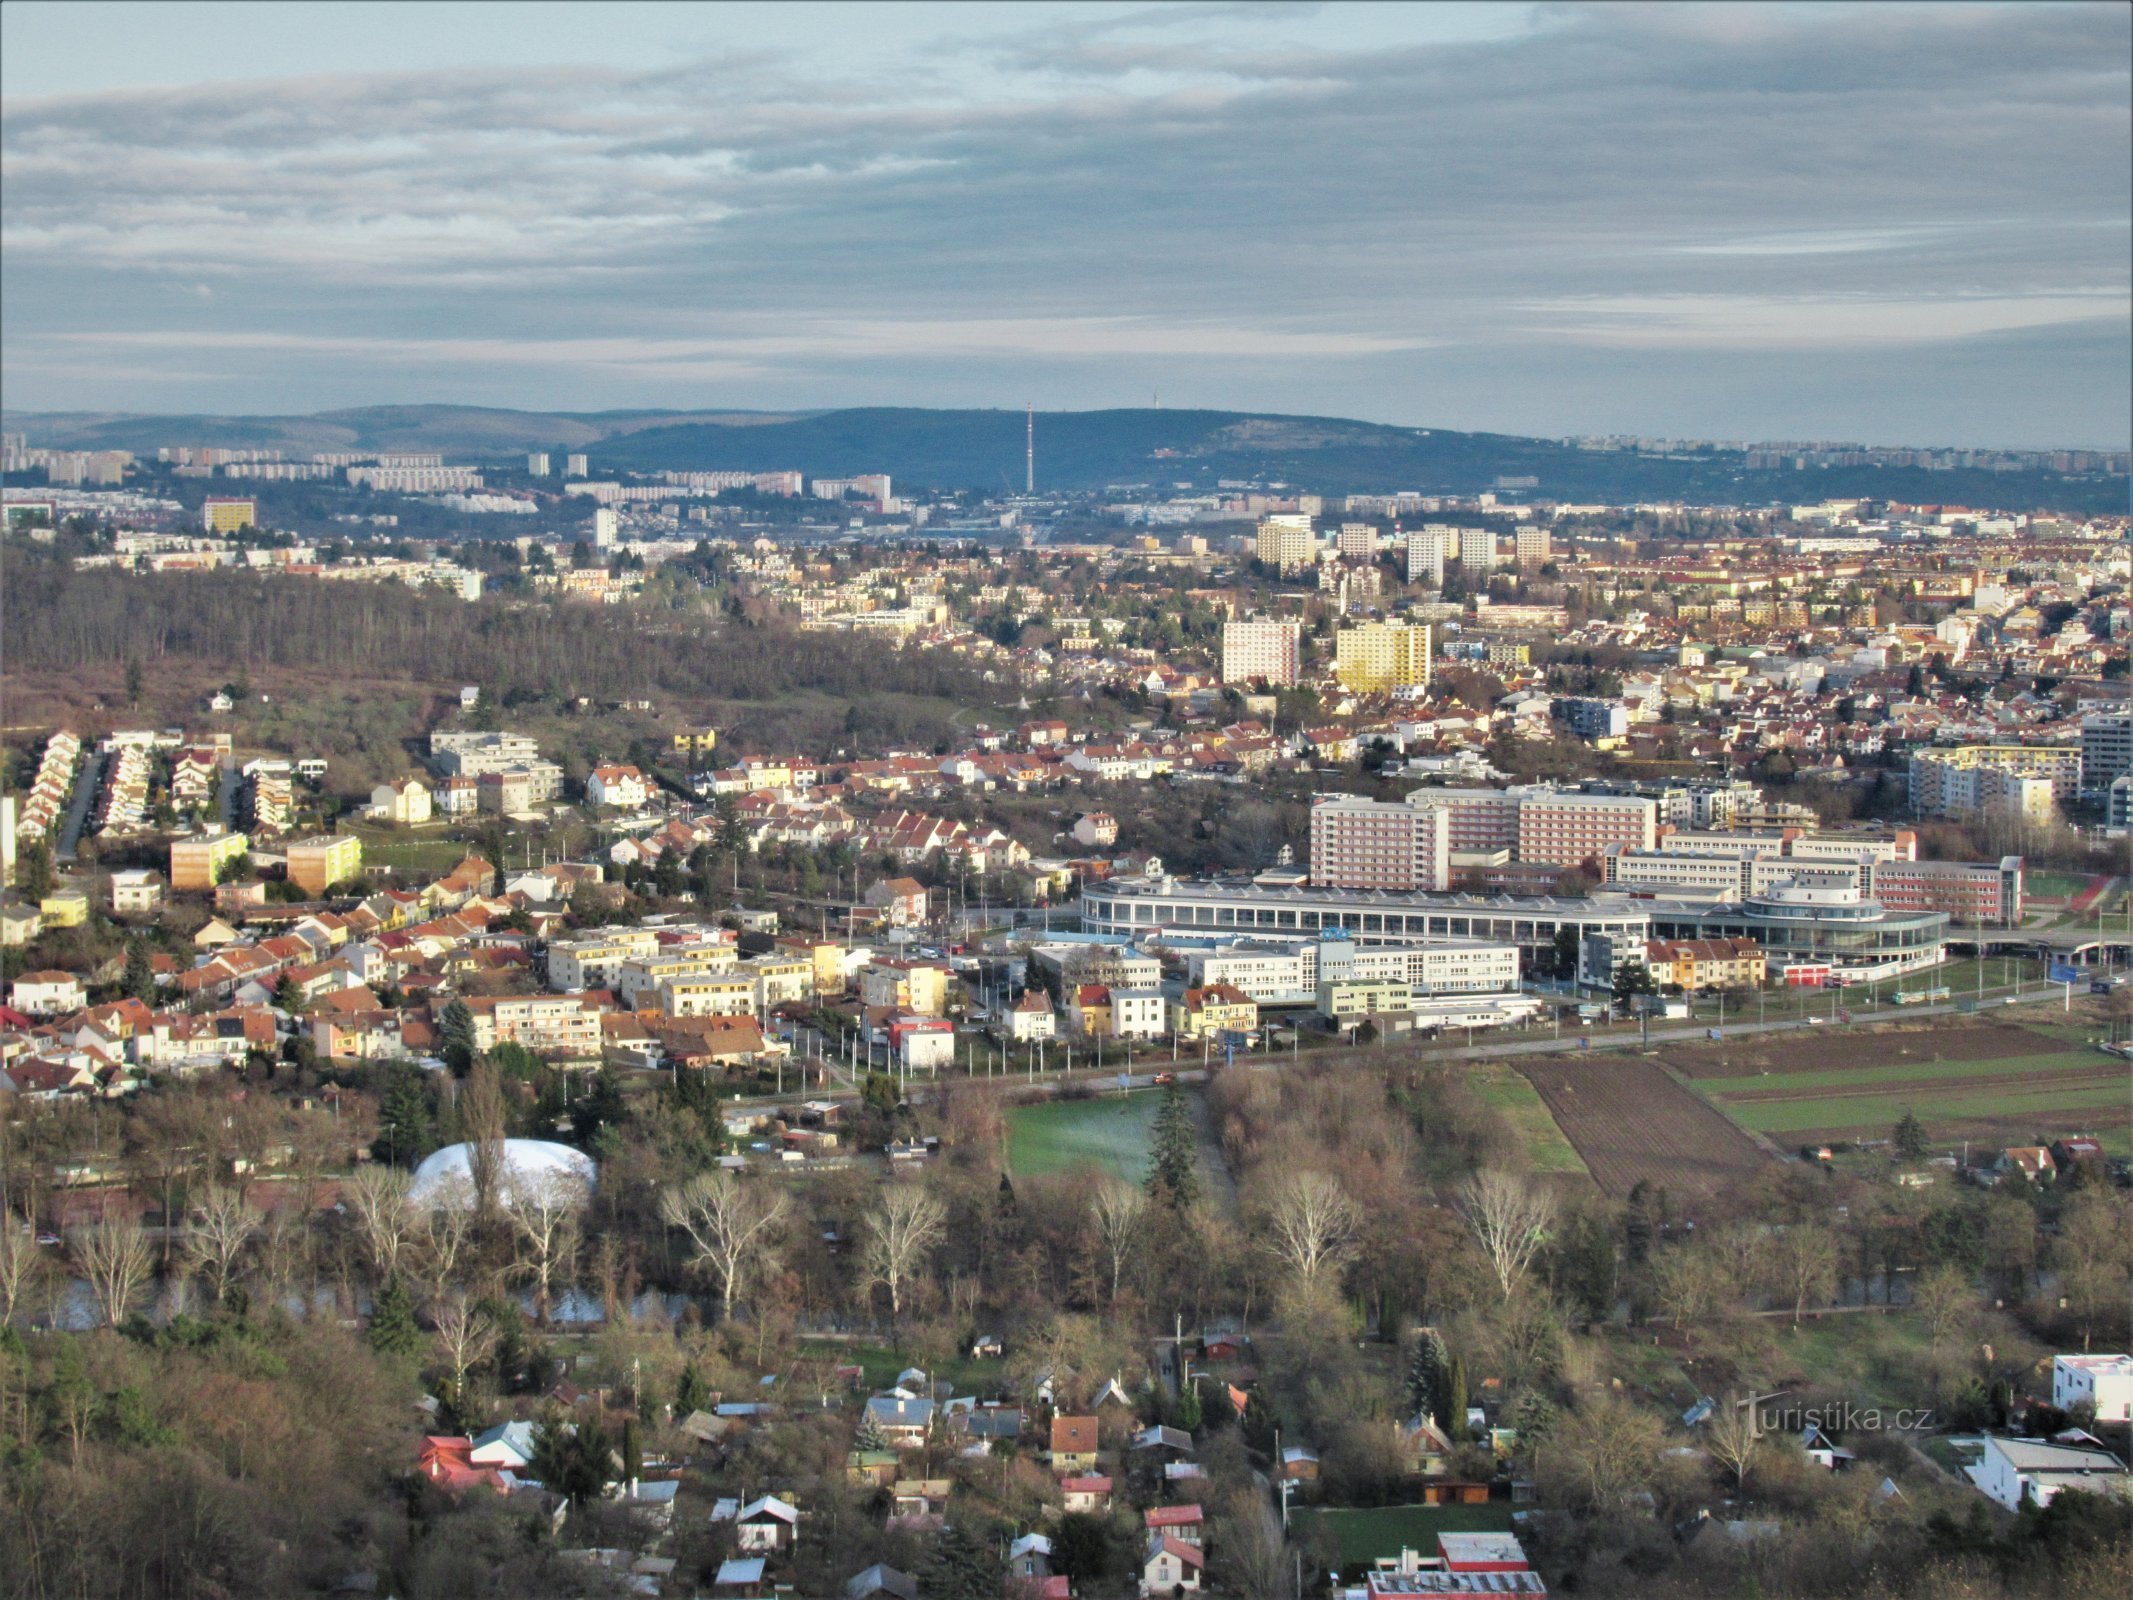 View from the observation tower towards the central part of the city